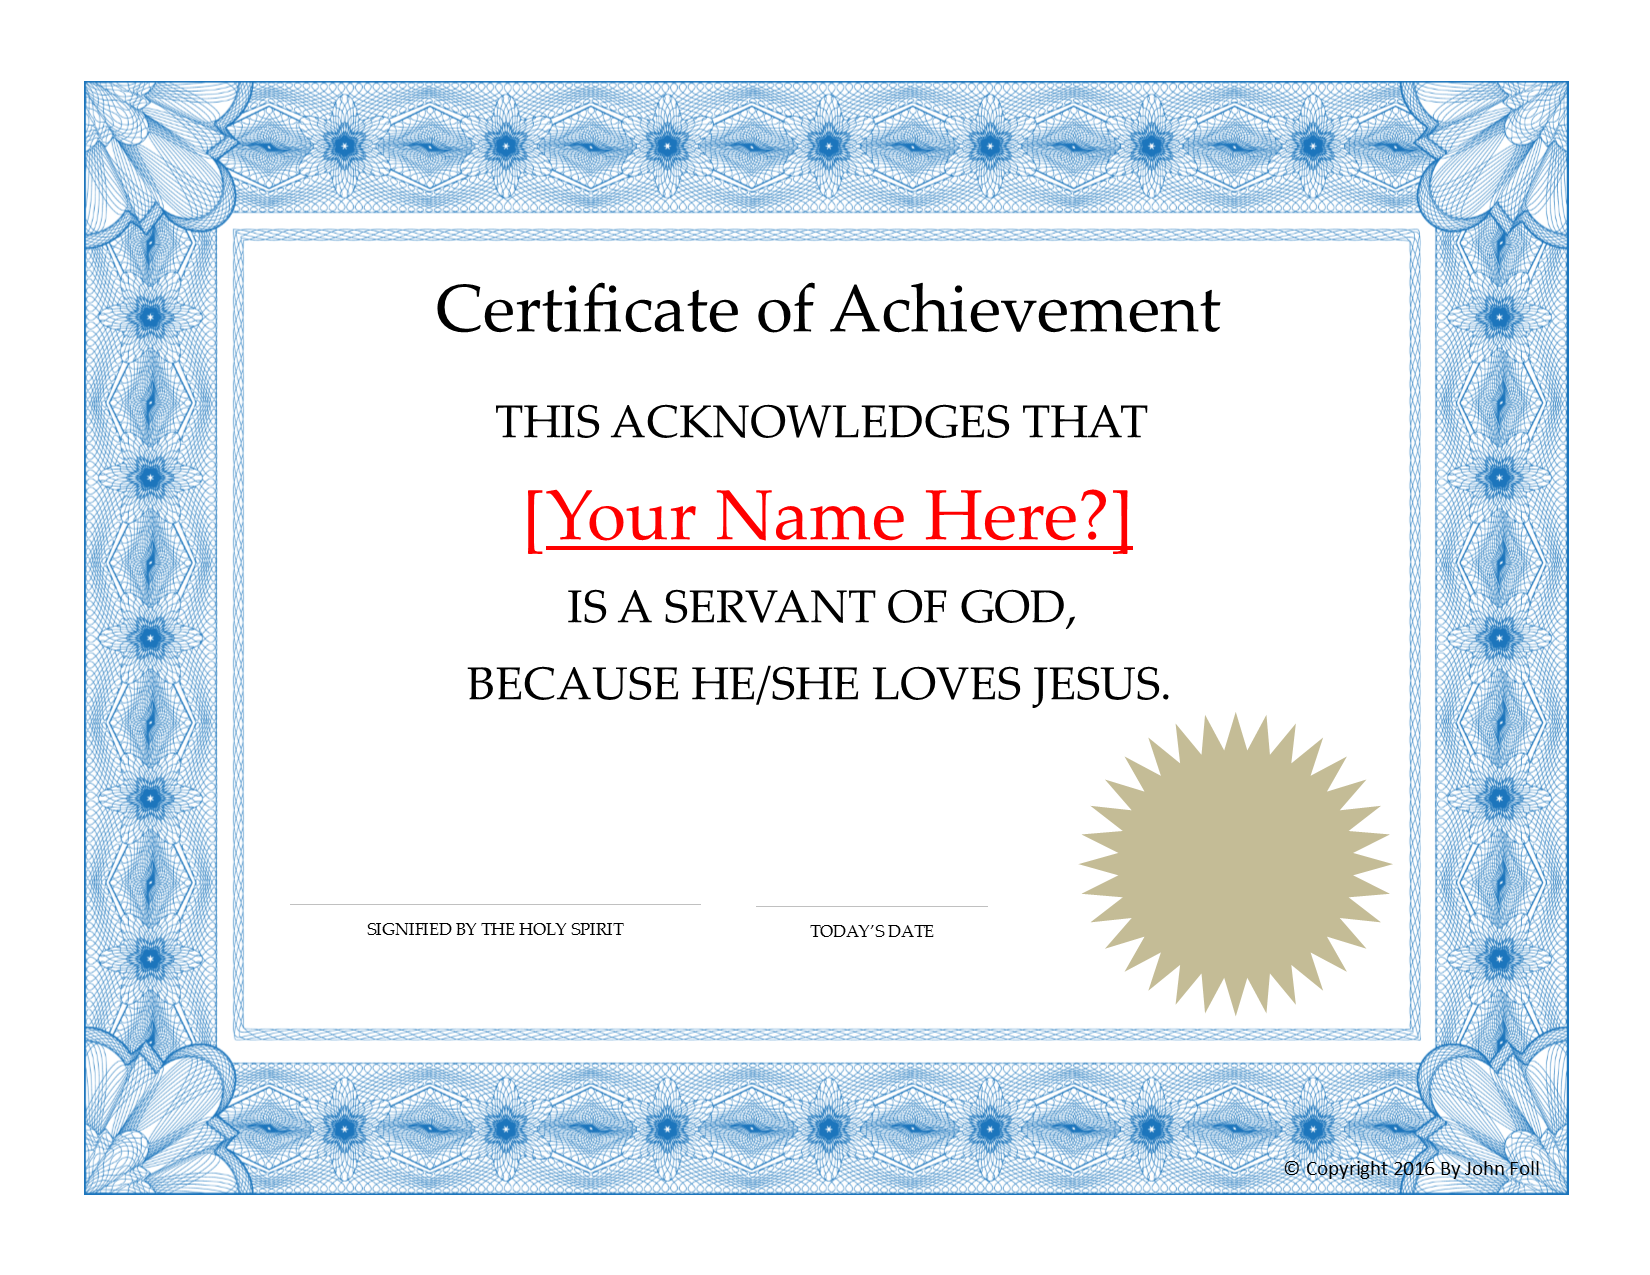 Your Name Here is a Servant of God Certificate Nugget Picture